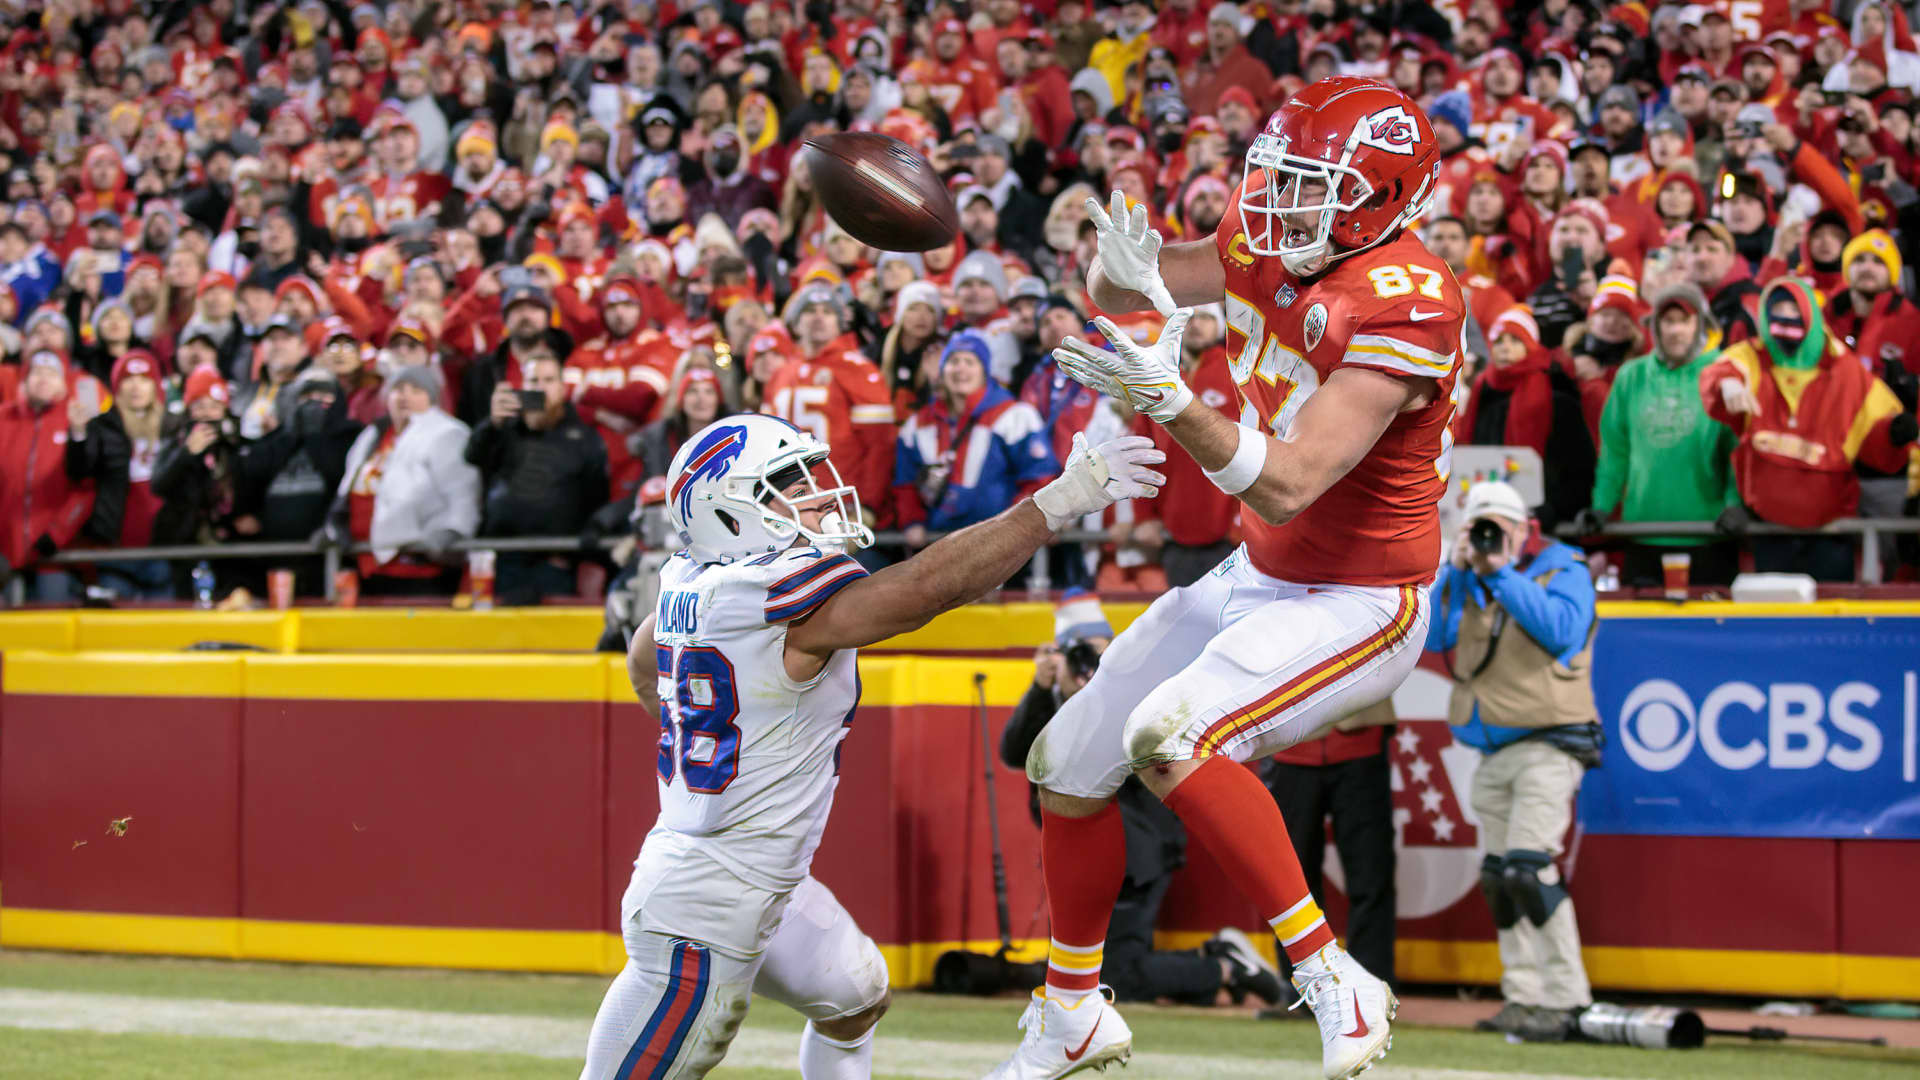 Kansas City Chiefs tight end Travis Kelce (87) reaches for the game winning reception over Buffalo Bills outside linebacker Matt Milano (58) during the AFC Divisional Round playoff game on January 23rd, 2022 at Arrowhead Stadium in Kansas City, Missouri.